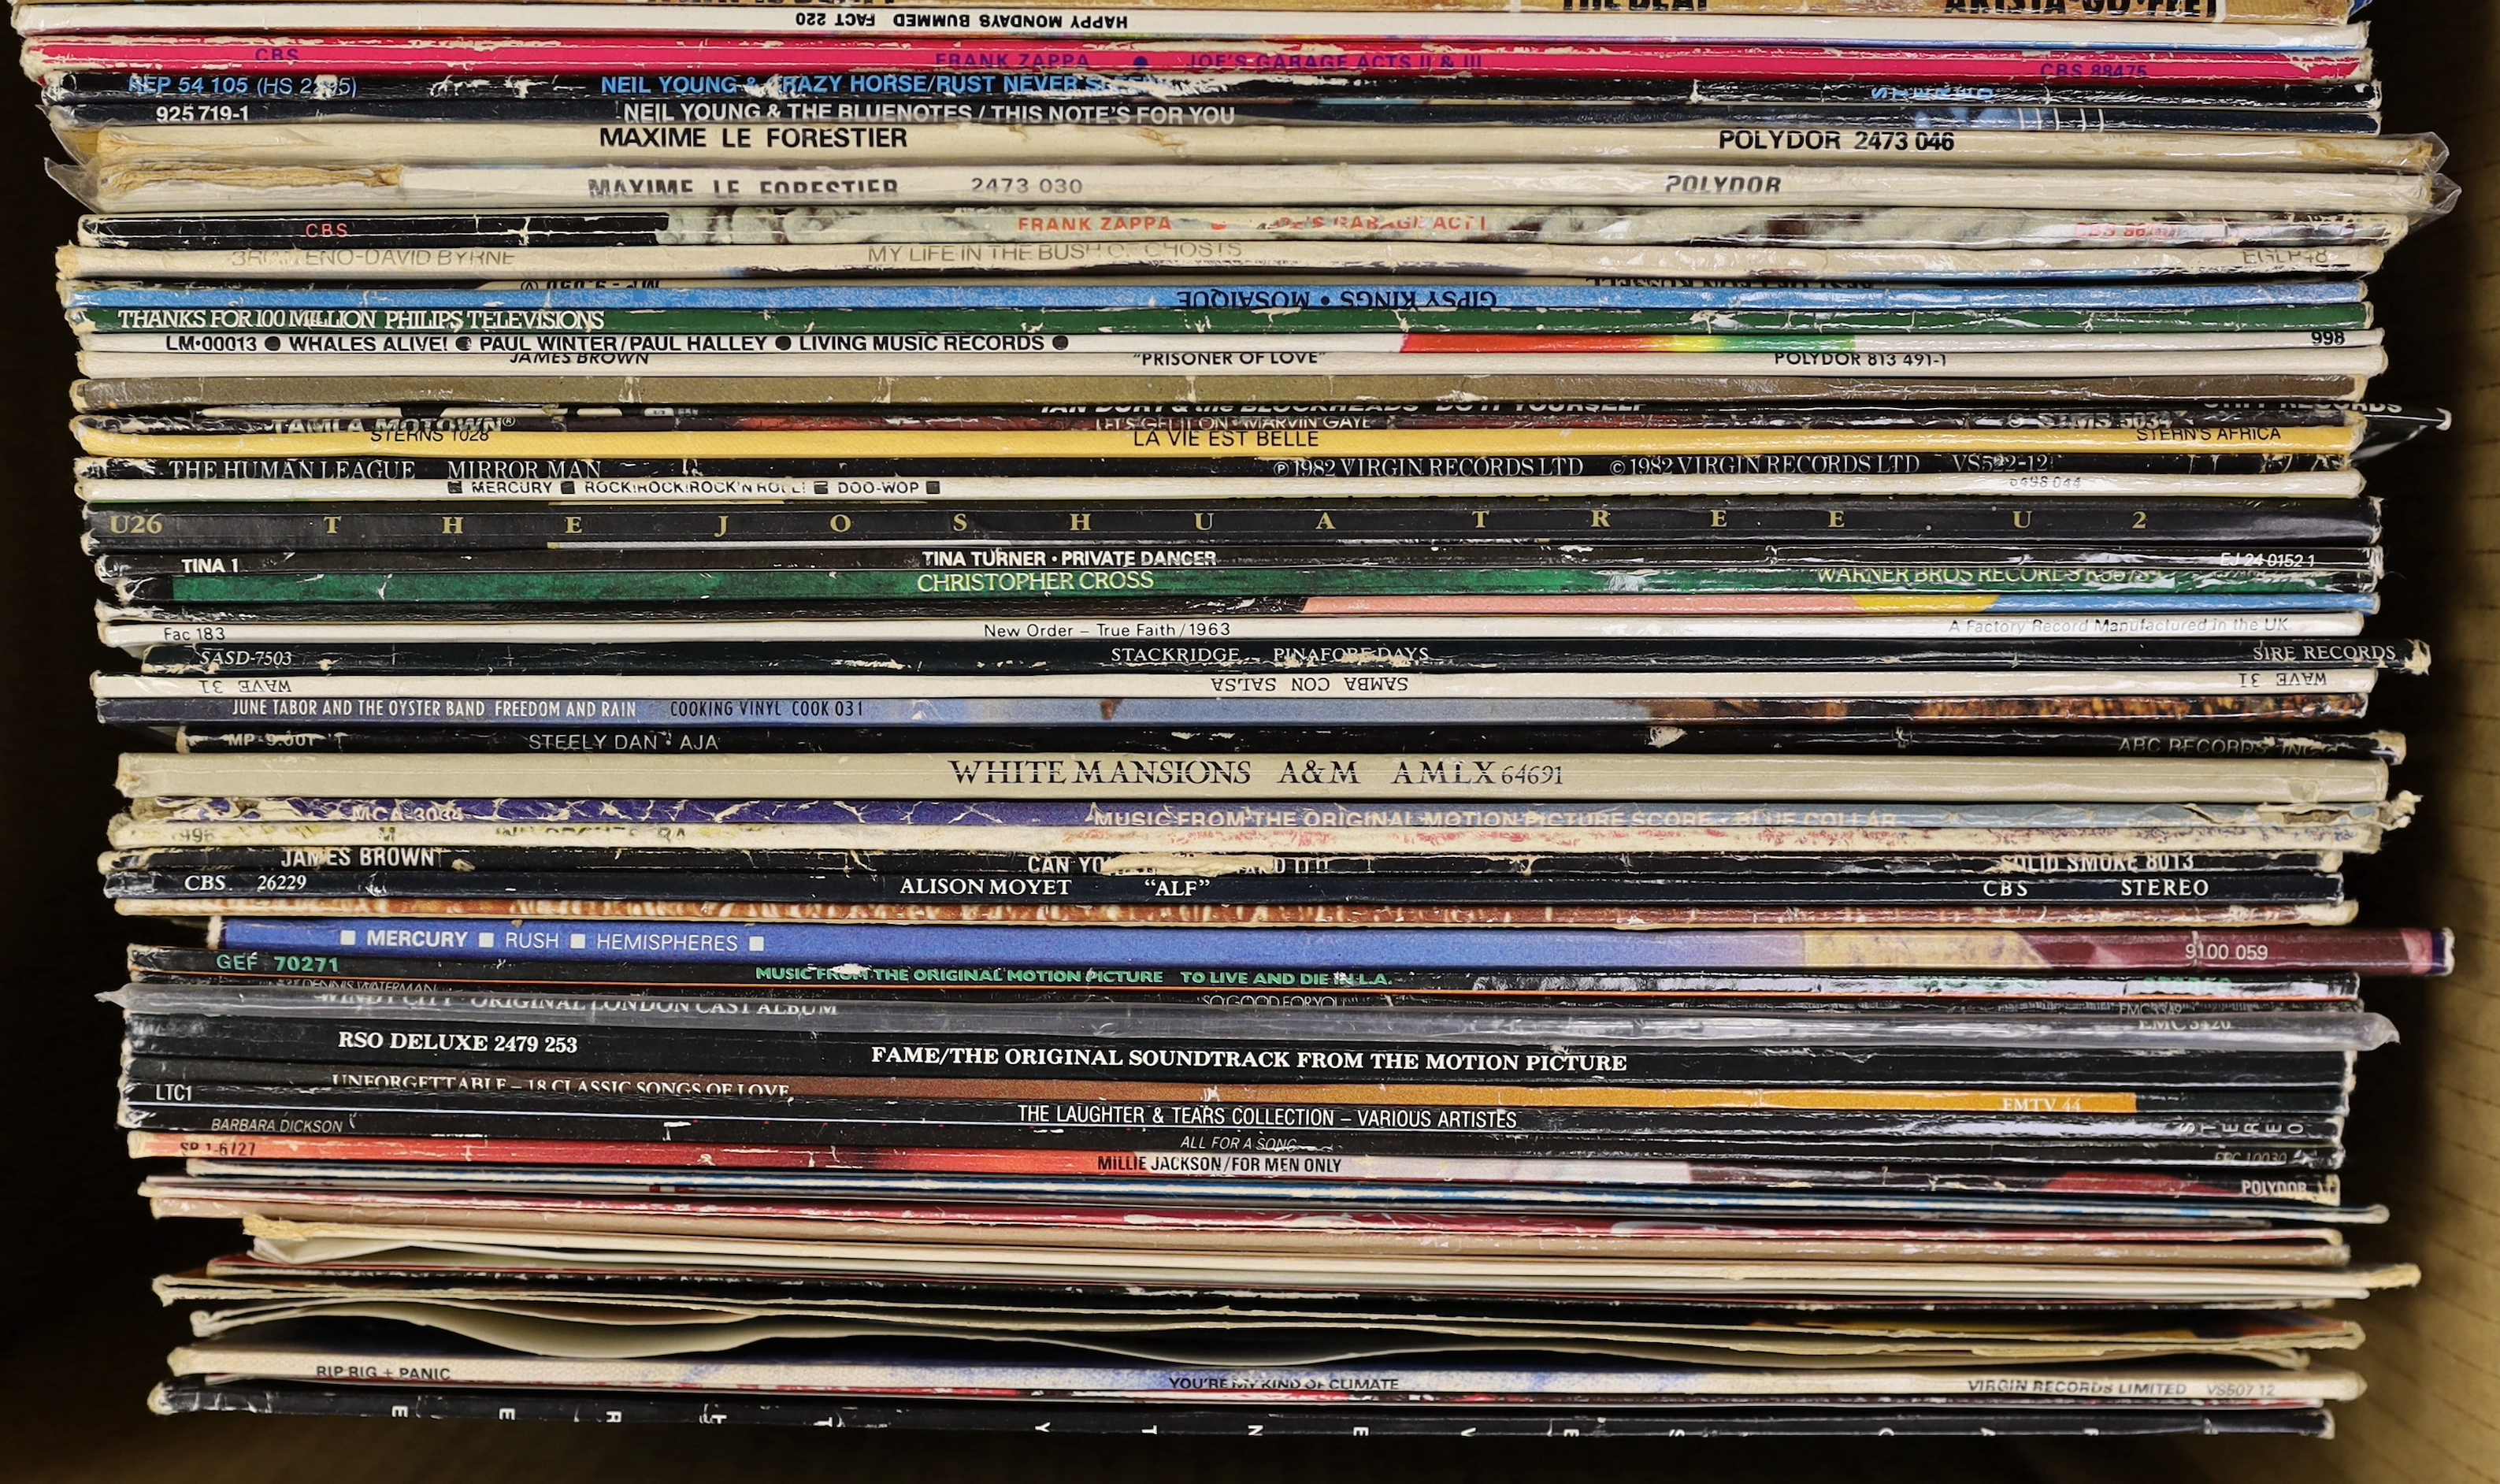 Seventy mostly 1980's LPs, including Blondie, Joan Armatrading, Texas, Happy Mondays, Neil Young and crazy horse, Ian Dury and the Blockheads, Tina Turner, James Brown, etc.